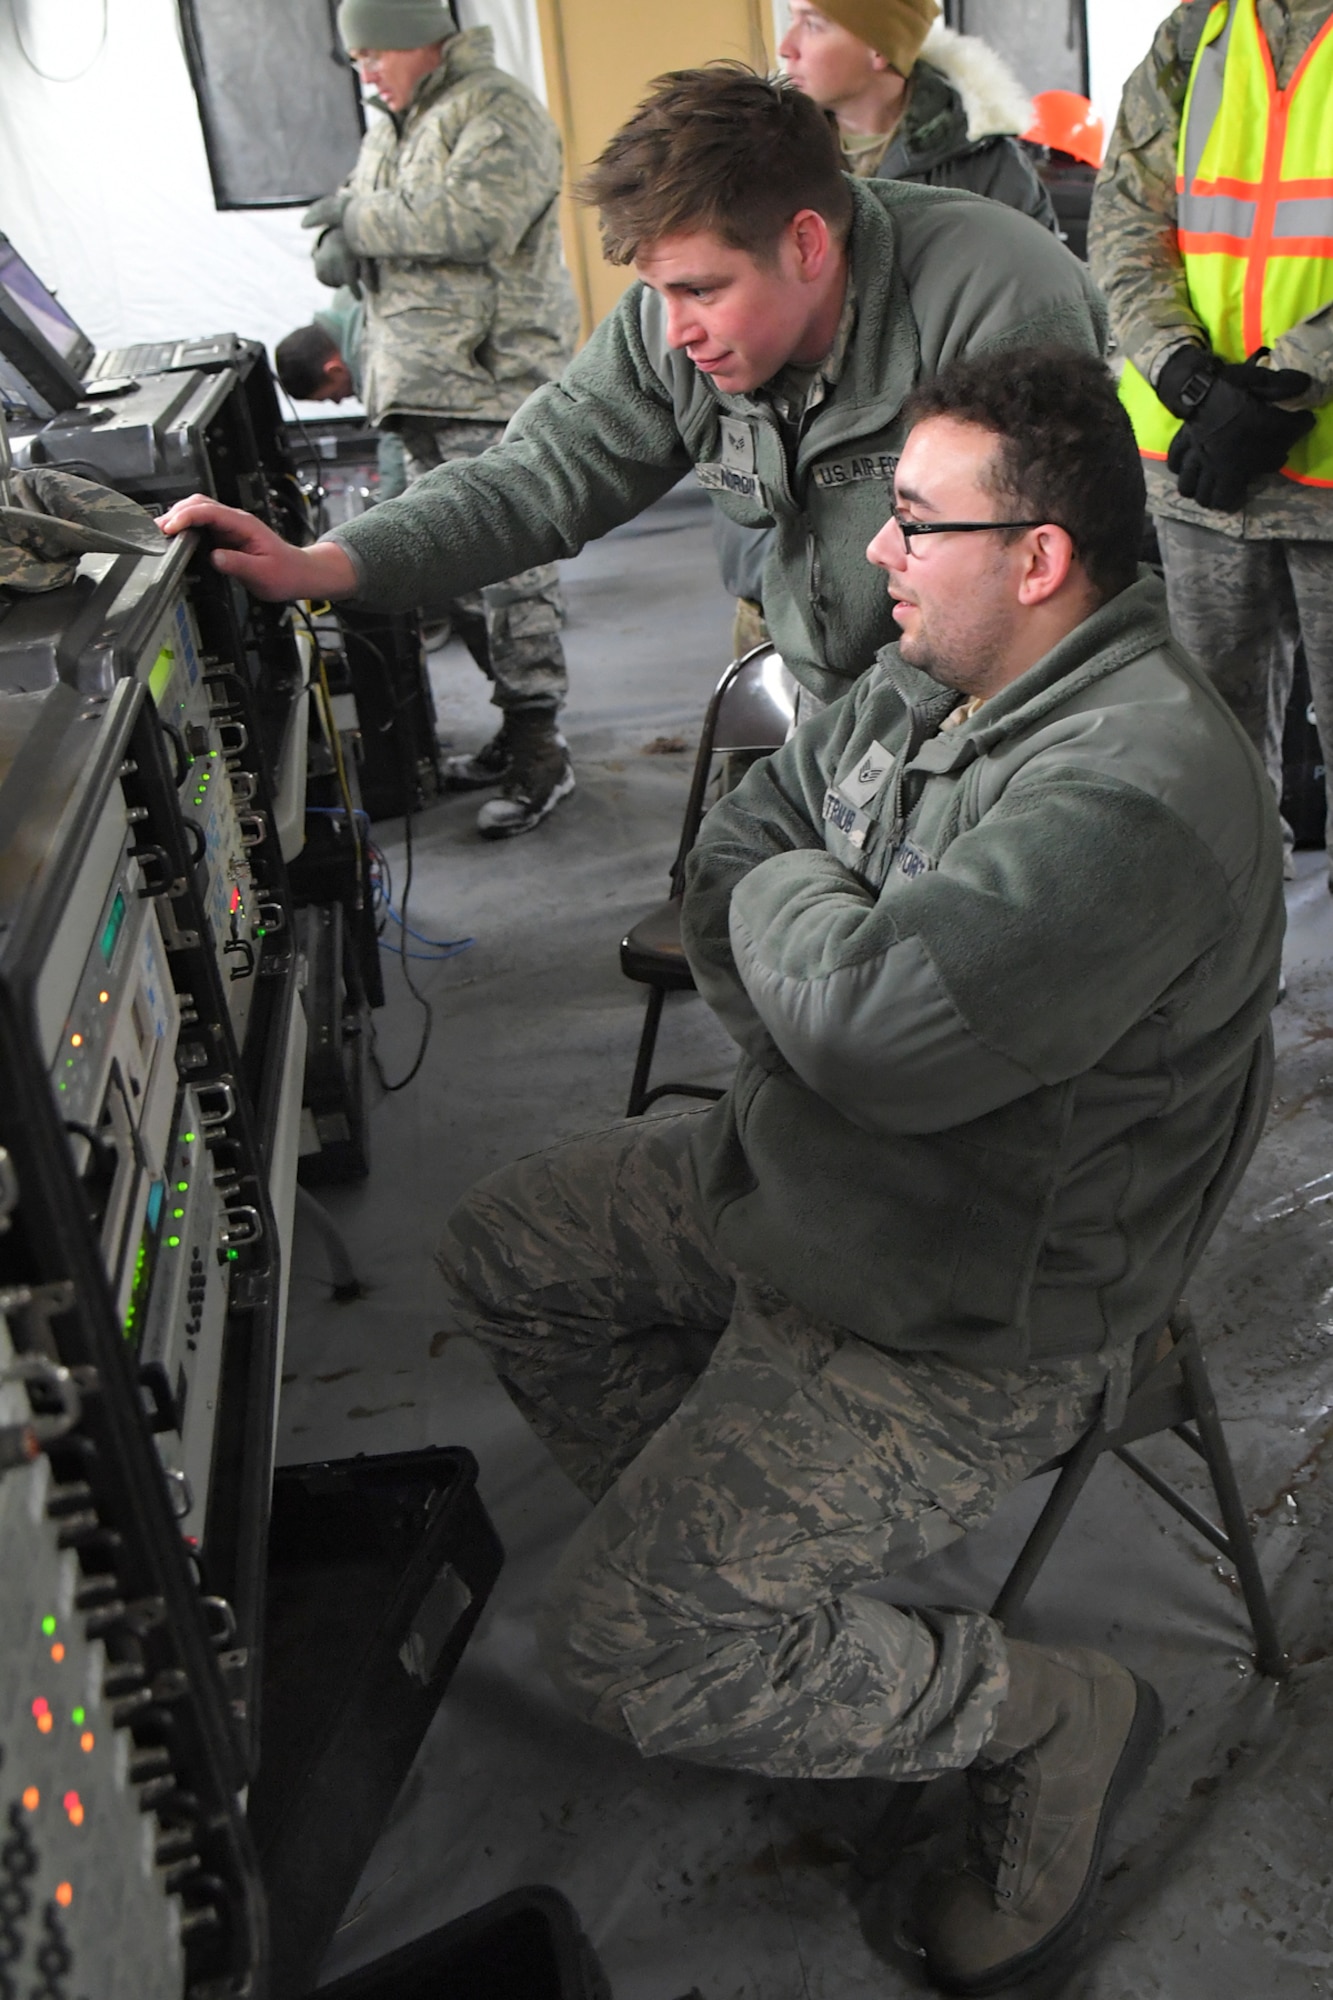 Staff Sgt. Devin Traub (seated) and Senior Airman David Nordin, both 729th Air Control Squadron, monitor communications equipment Feb. 6, 2019, during a readiness exercise at Hill Air Force Base, Utah. The evolution was part of an exercise to mobilize and set up a deployed radar location and control reporting center. (U.S. Air Force photo by Todd Cromar)